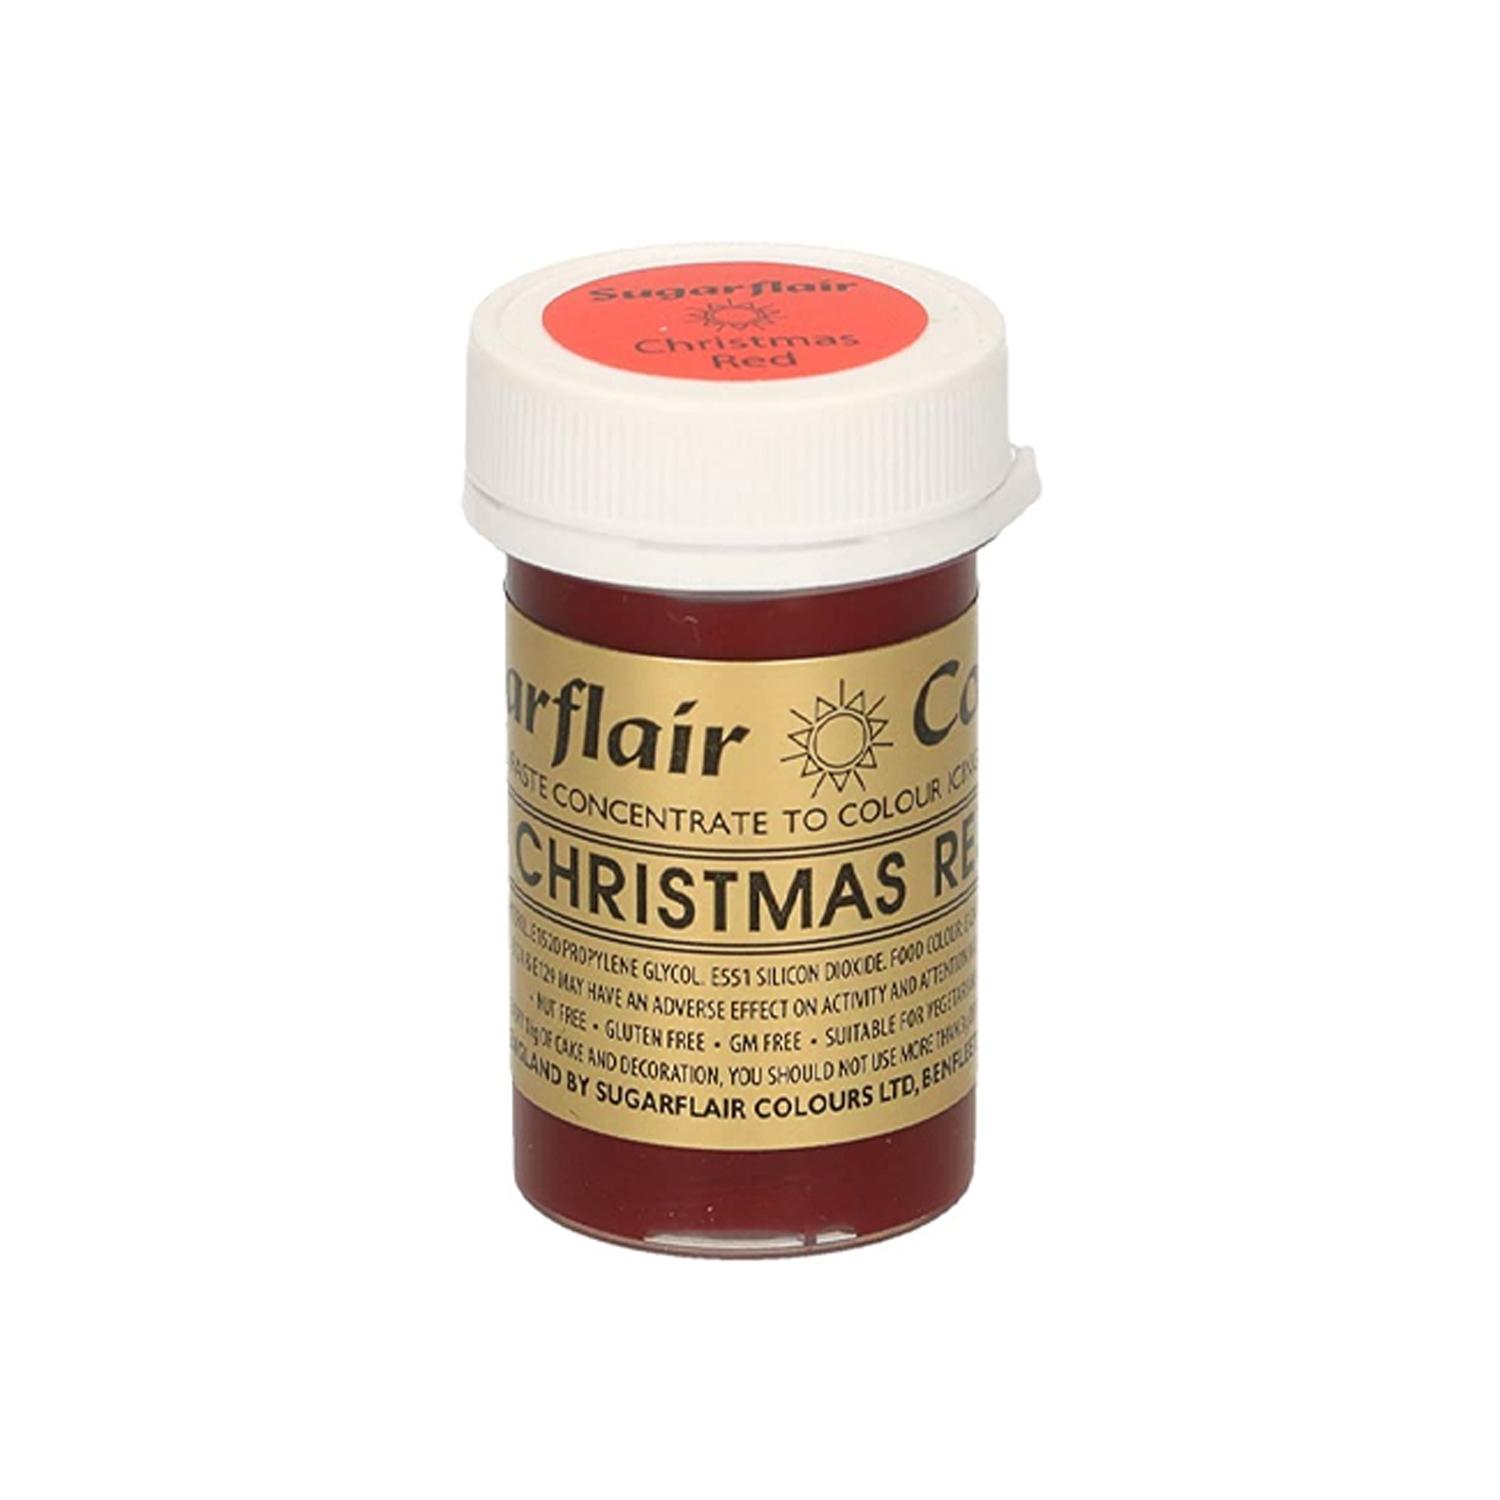 SUGARFLAIR COLOURS SPECTRAL PASTE CHRISTMAS RED 25GMS